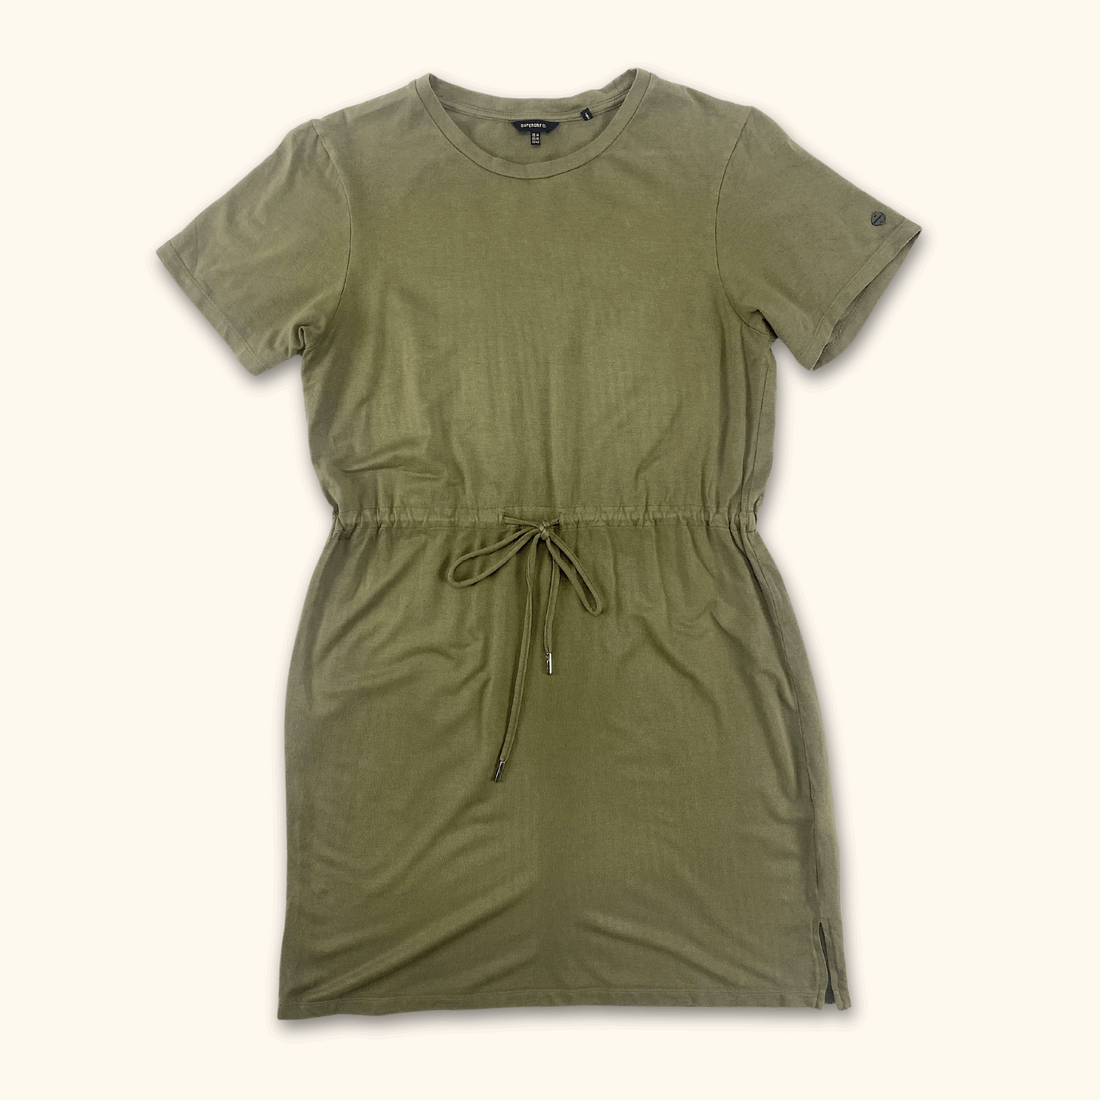 Superdry Khaki Green Jersey Dress with Drawstring - Size 14 - Superdry - Dresses